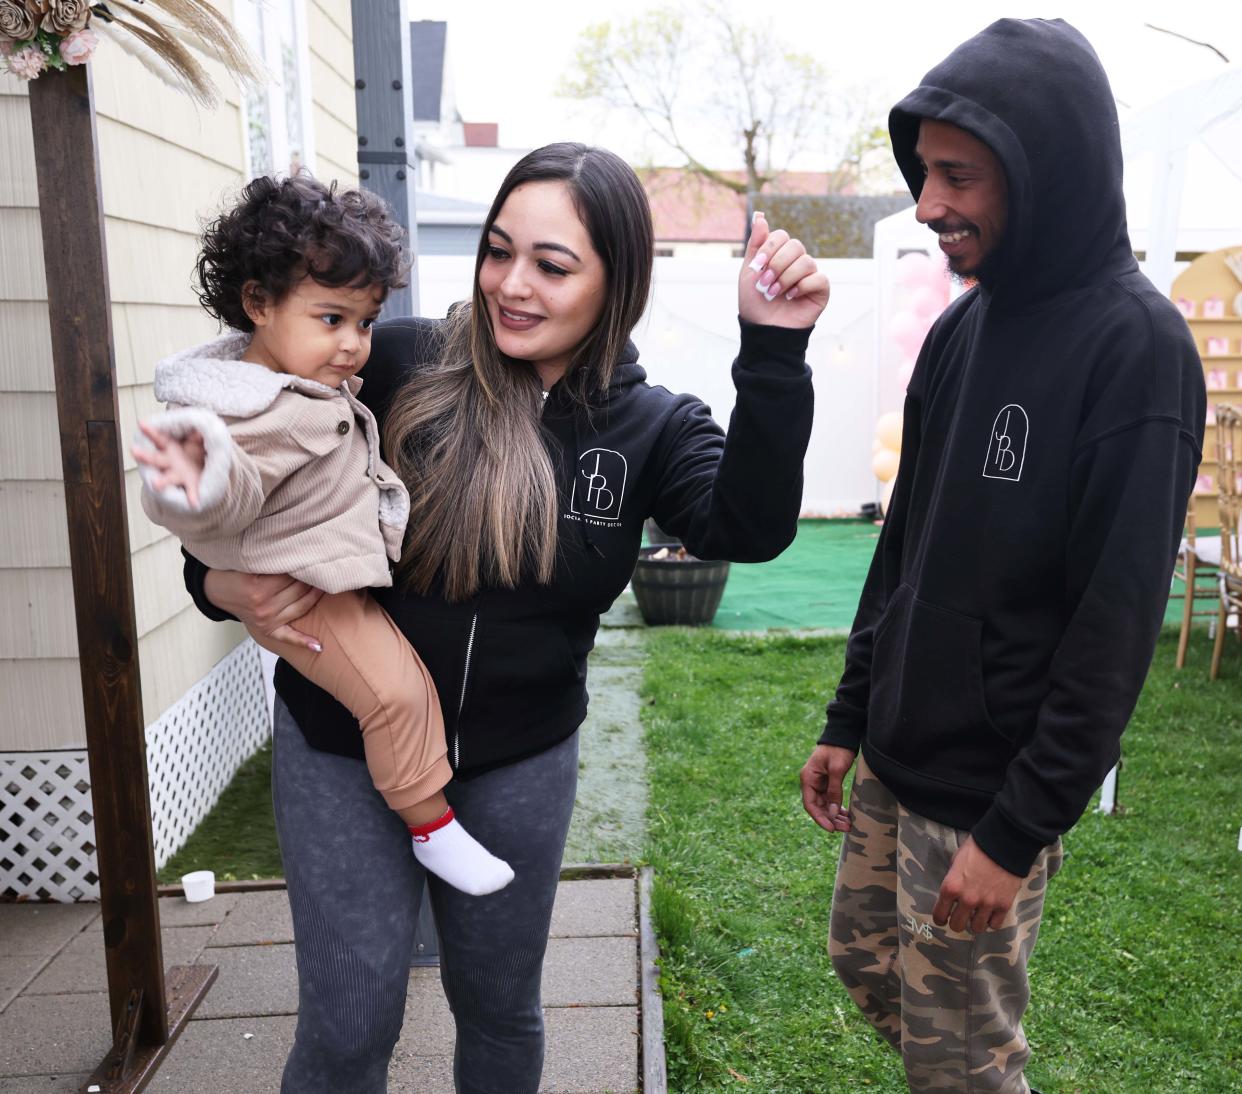 Cynthia Viruet owner of Jociahs Party Decor (JPD) with Rejay Fernandes and their son Jociah at a house party at North Main Street in Brockton on Saturday, April 20, 2024.